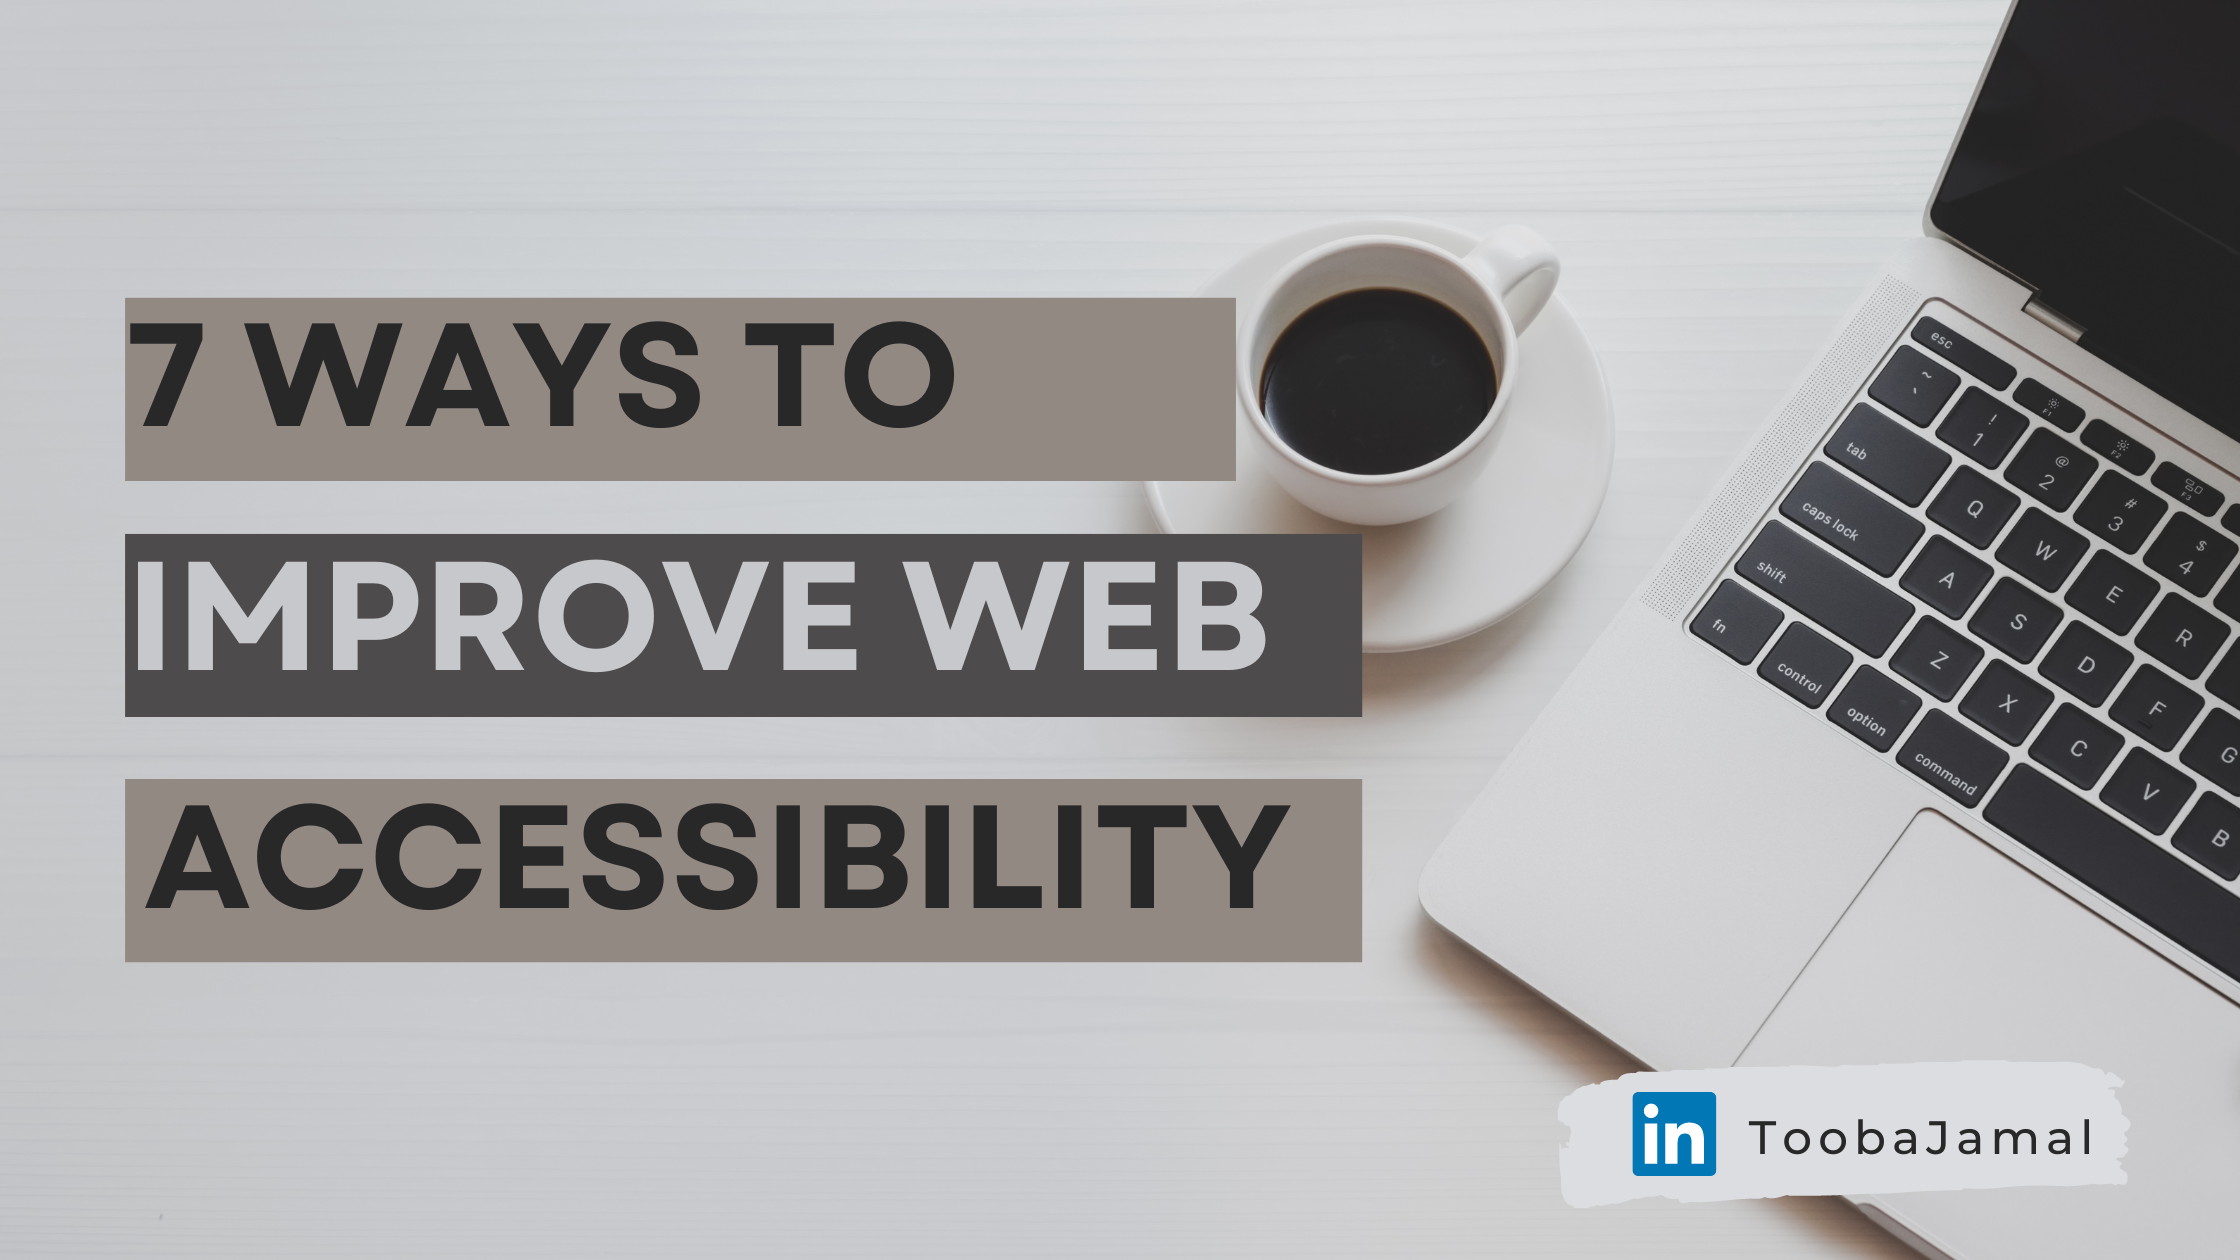 How to Improve Website Accessibility – 7 Helpful Tips